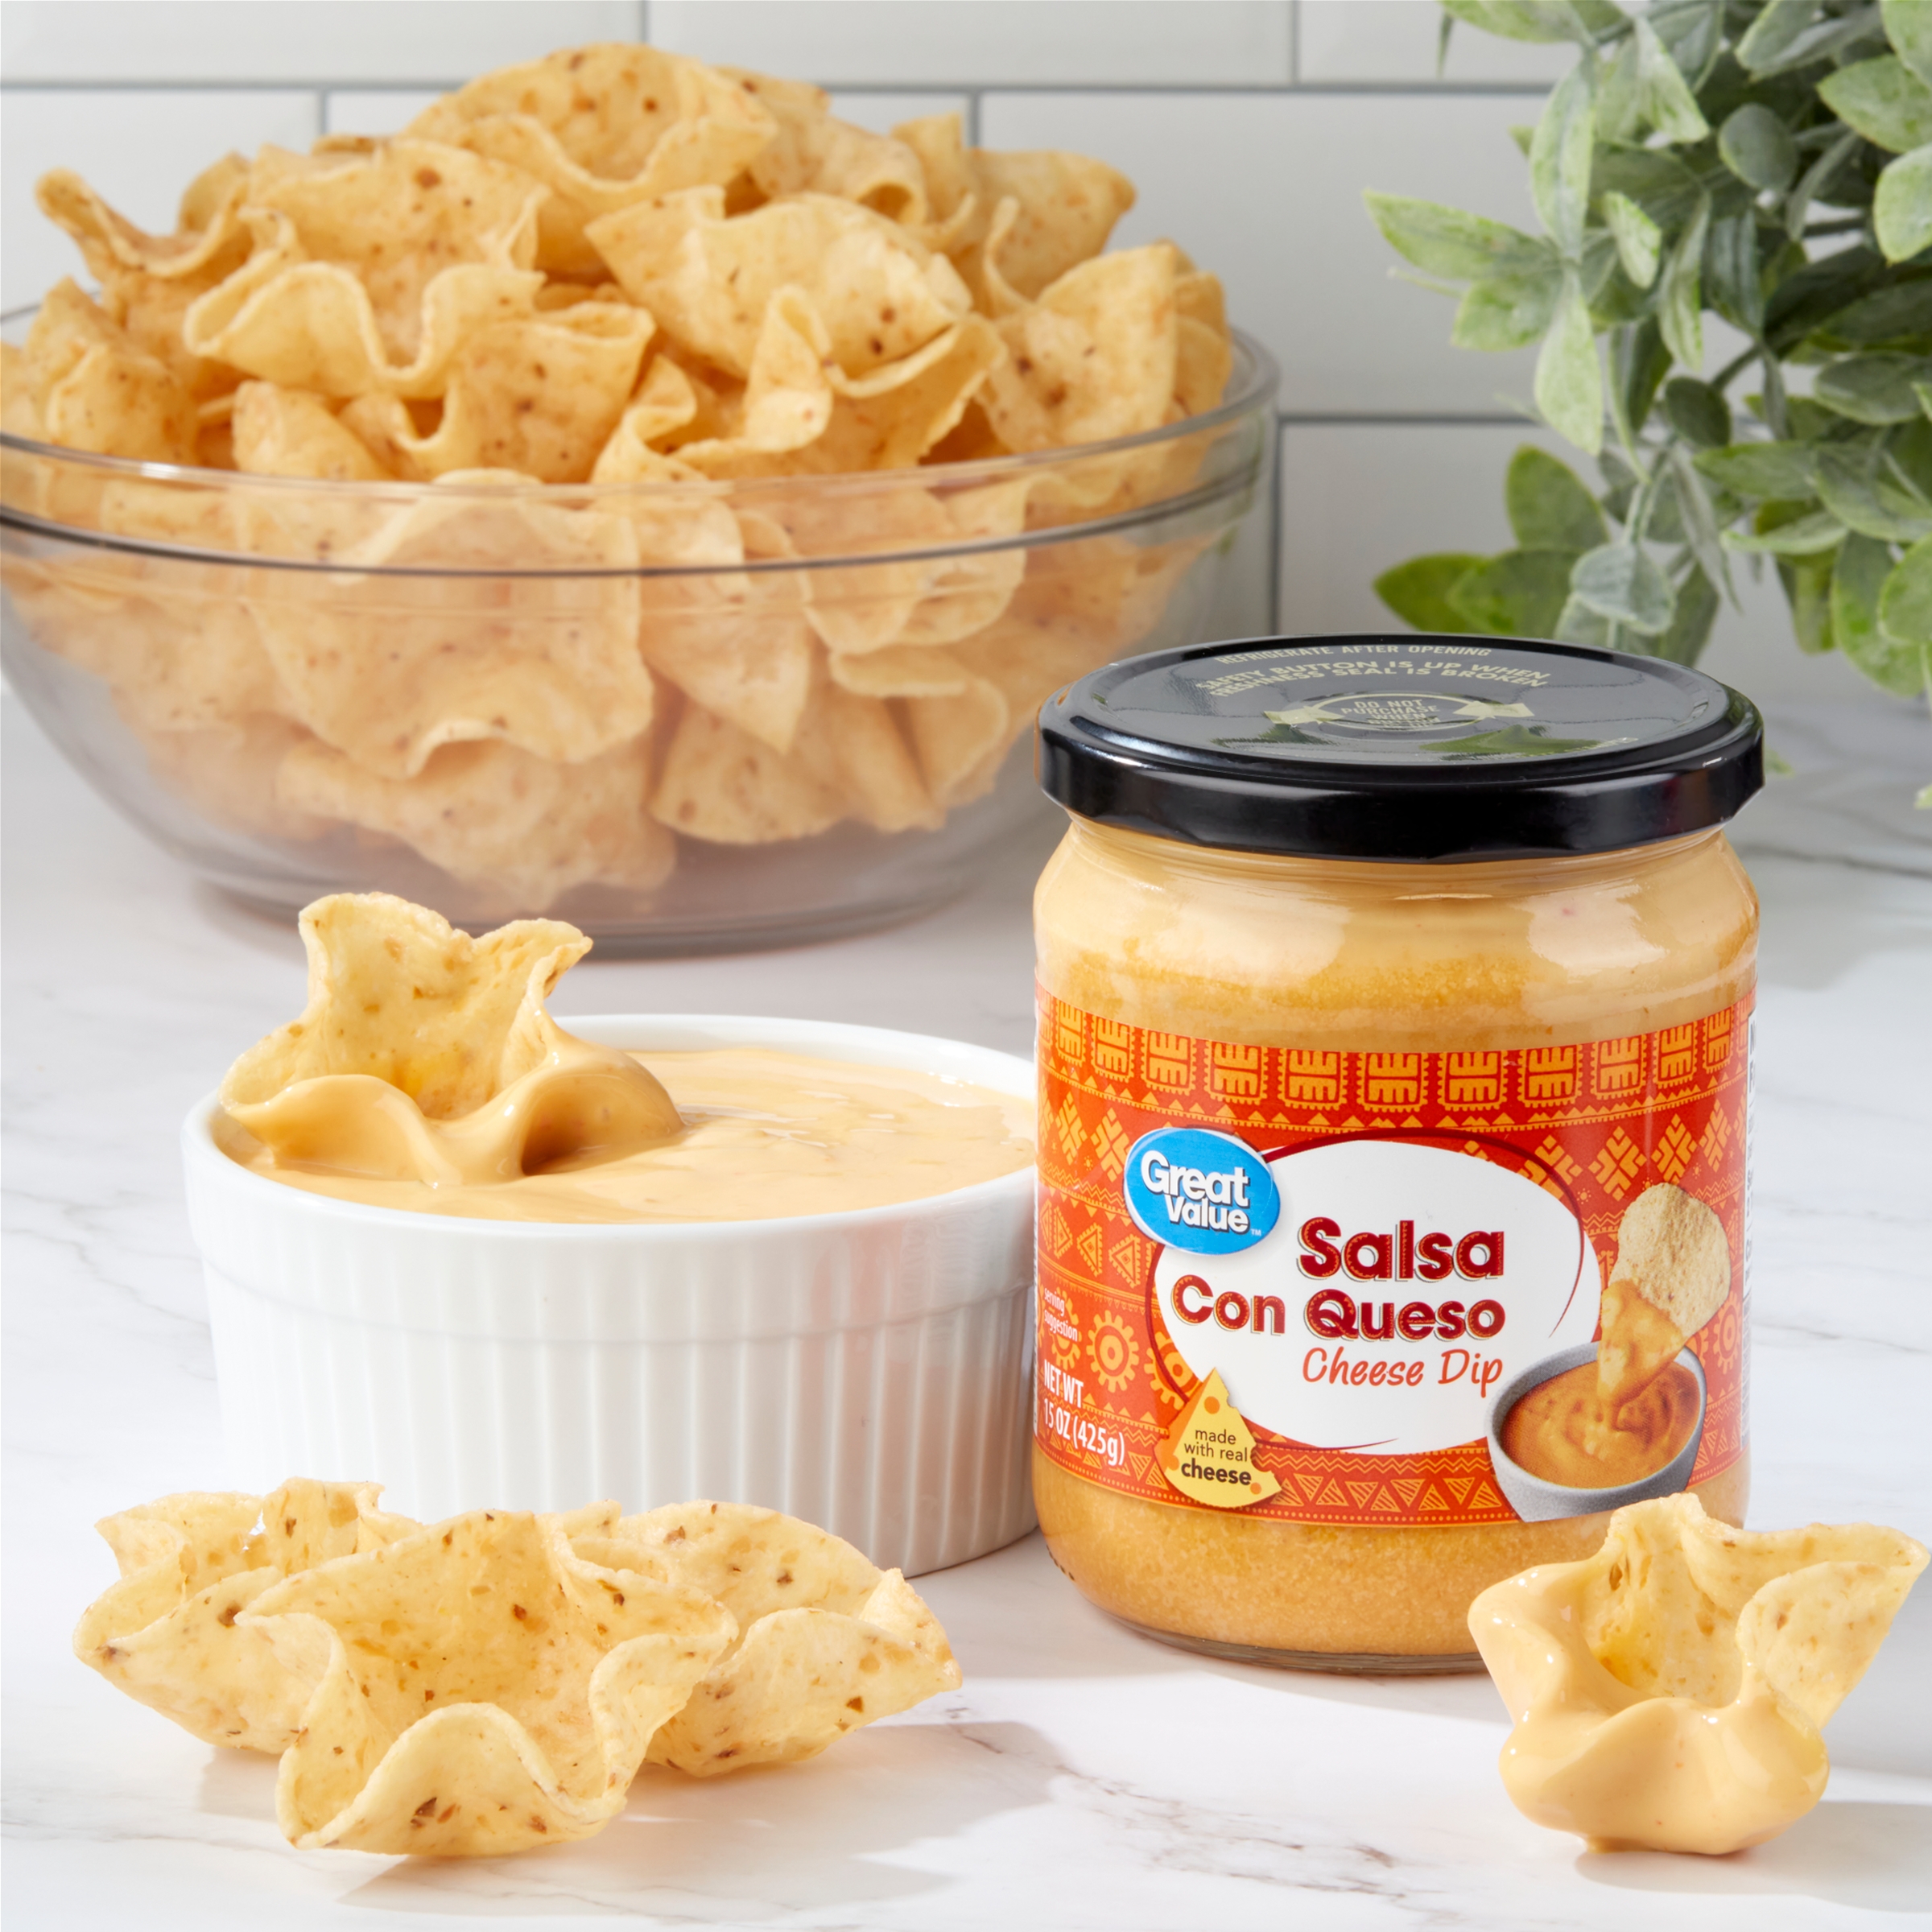 Great Value Salsa Con Queso Cheese Dip, 15 oz - image 2 of 8